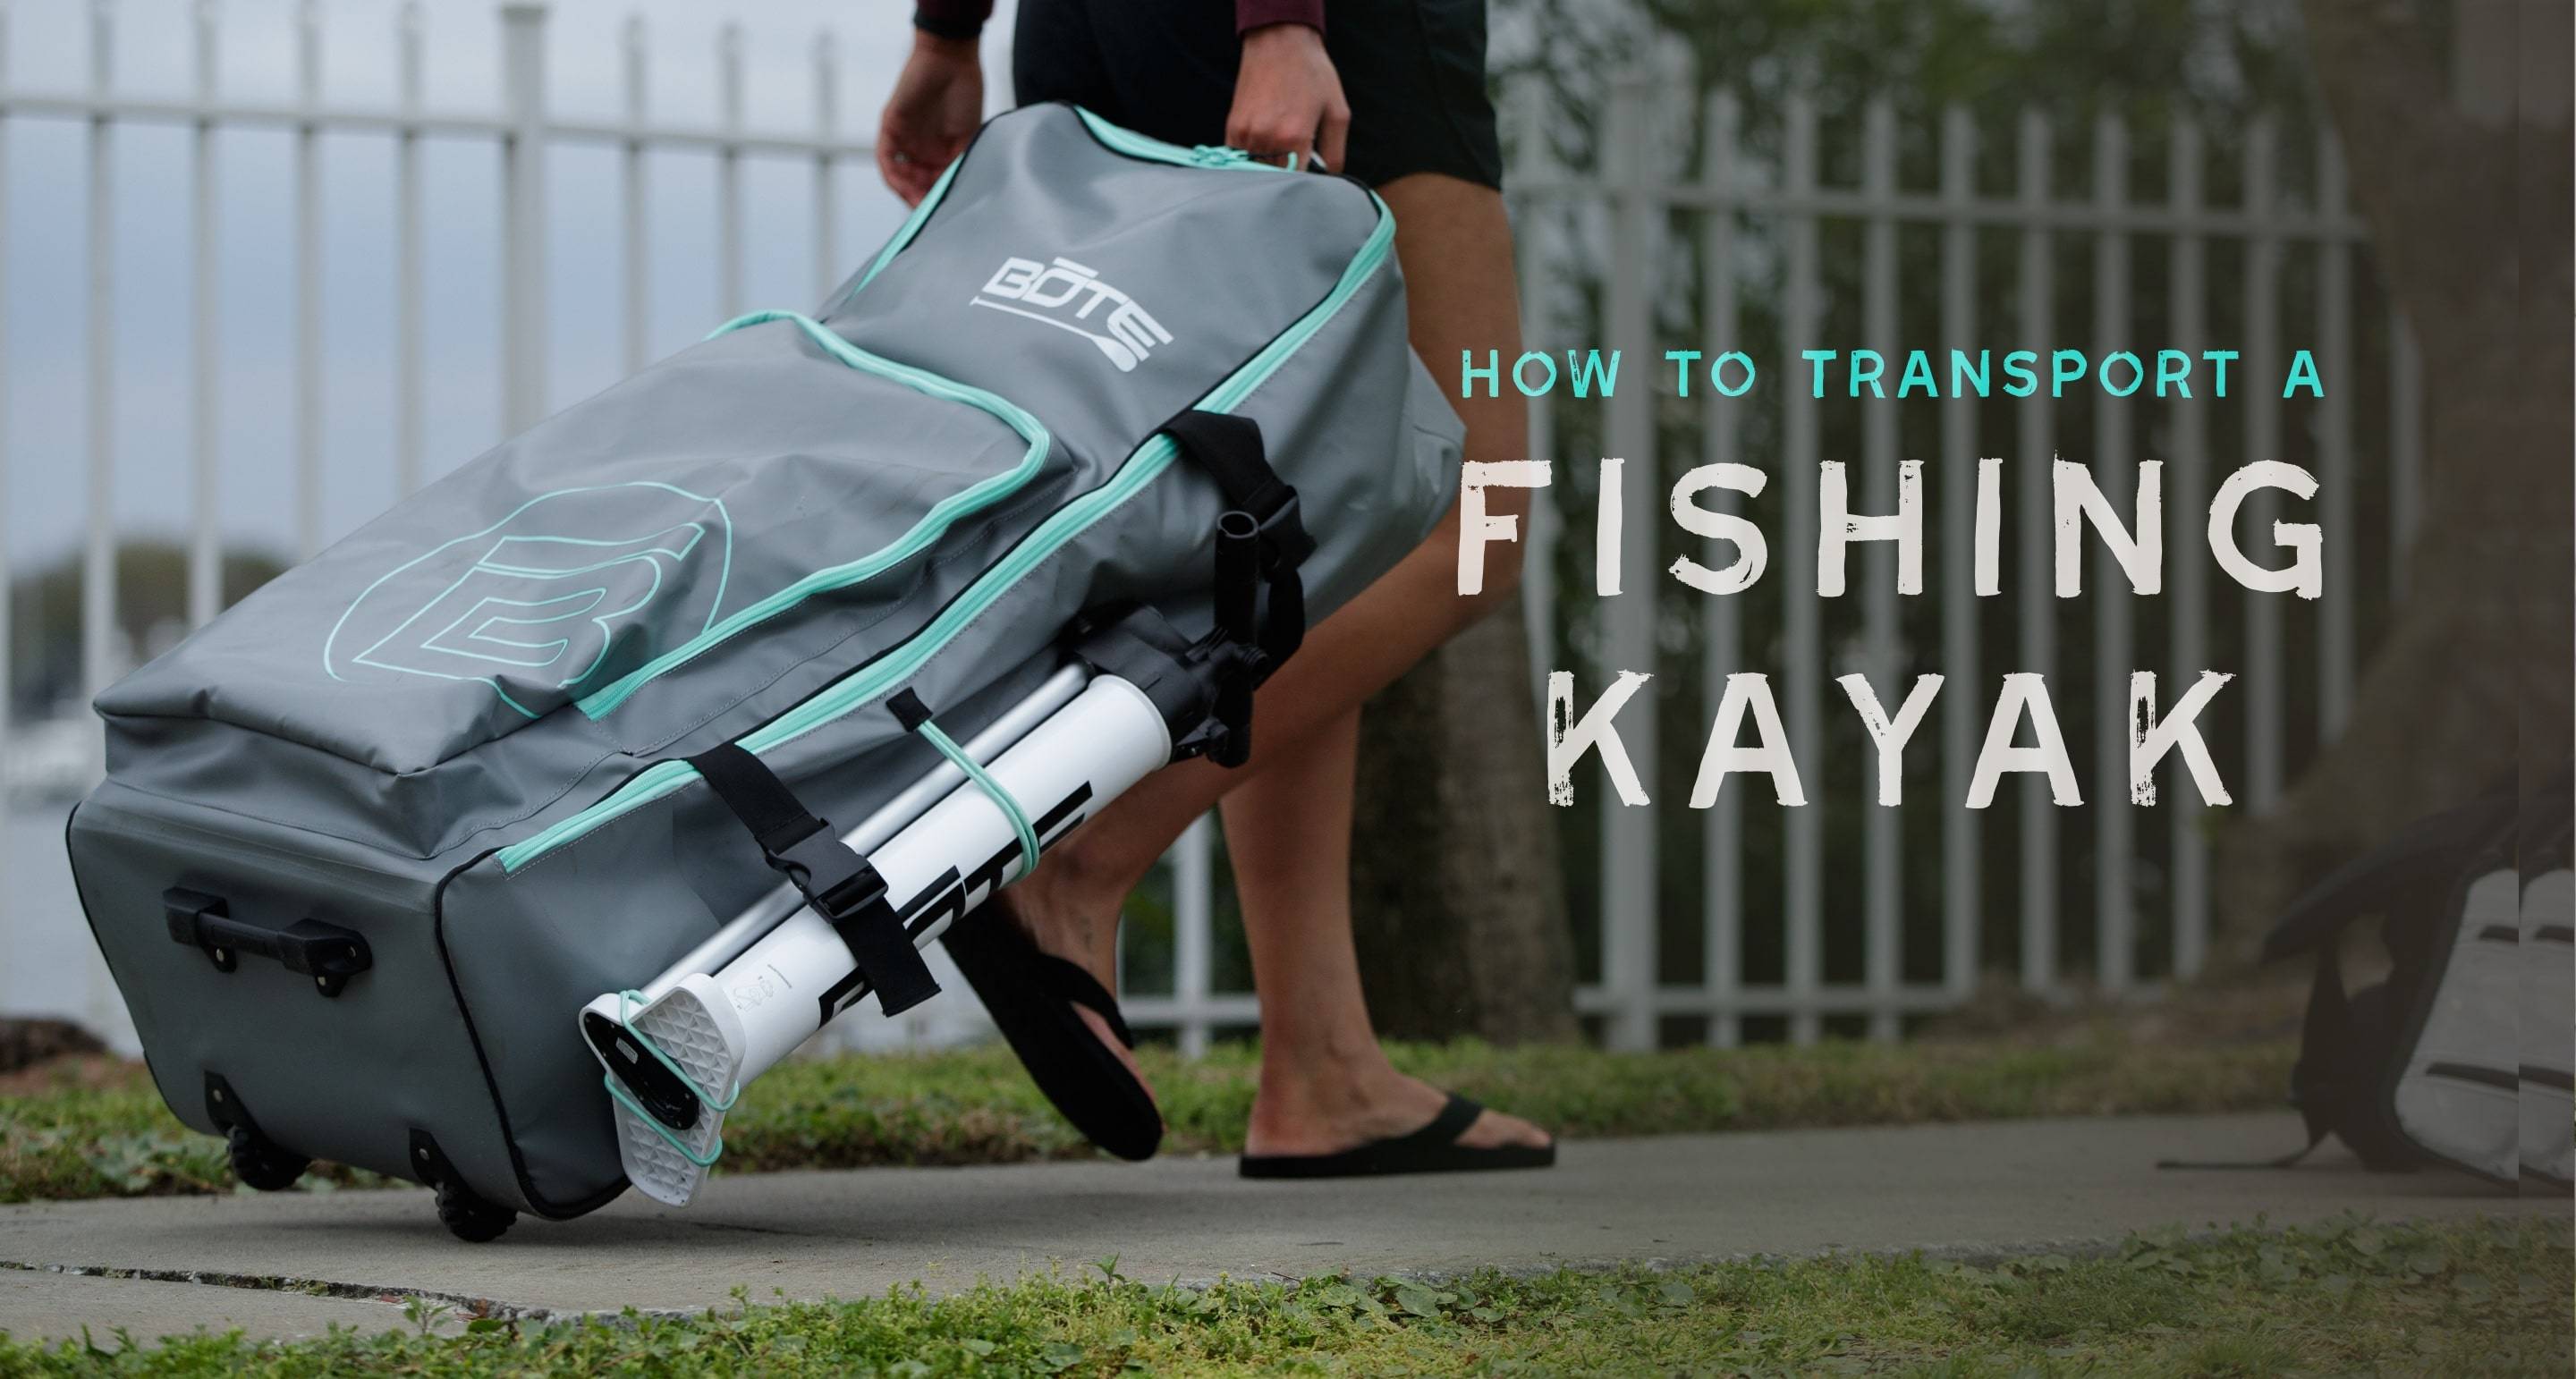 How to Transport a Fishing Kayak